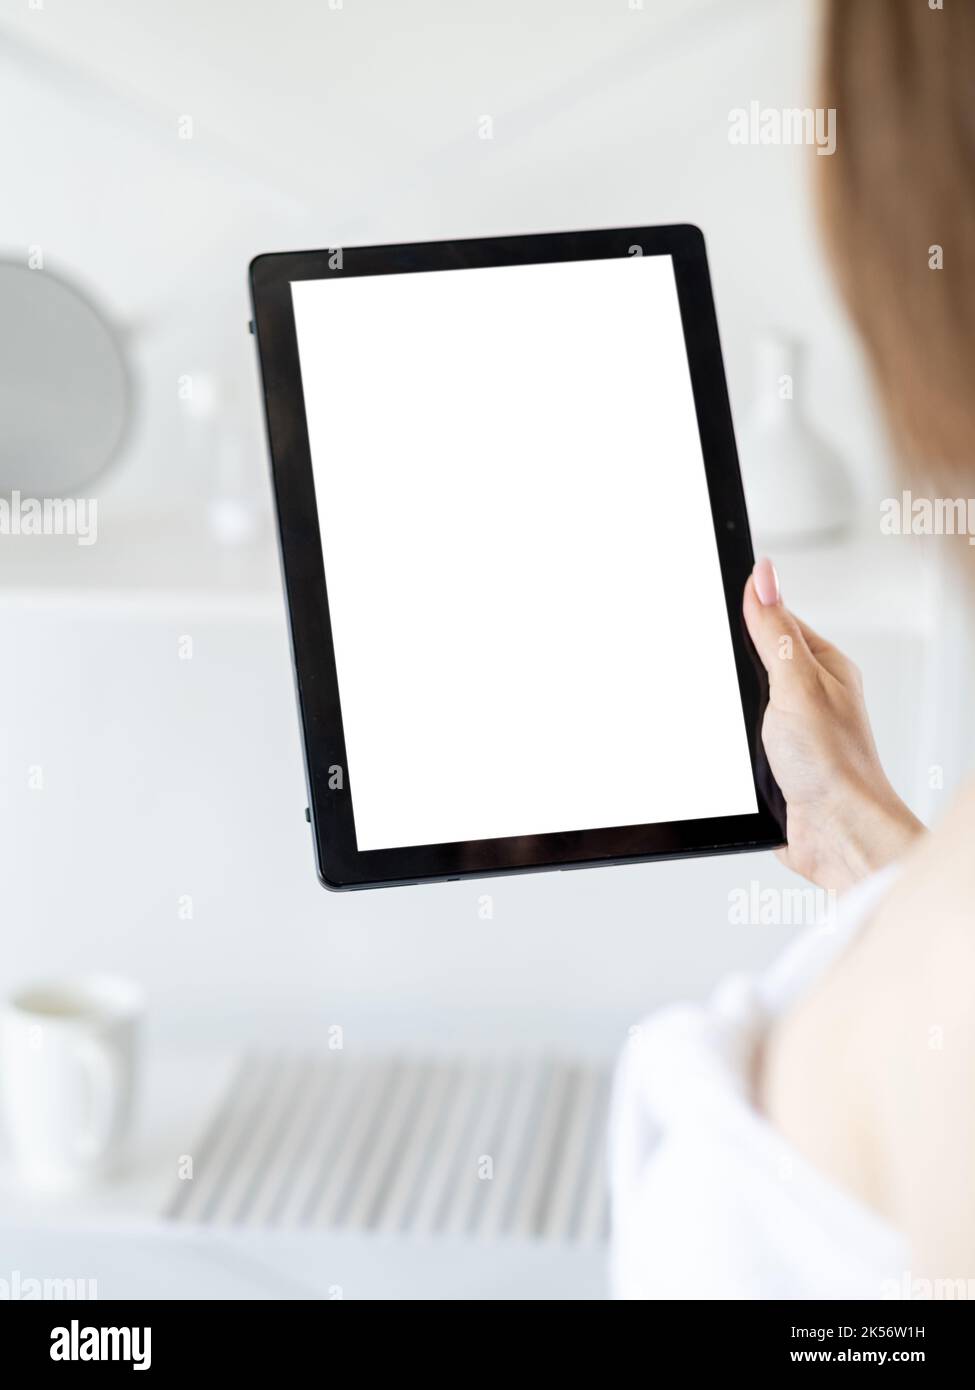 online message digital mockup morning routine Stock Photo